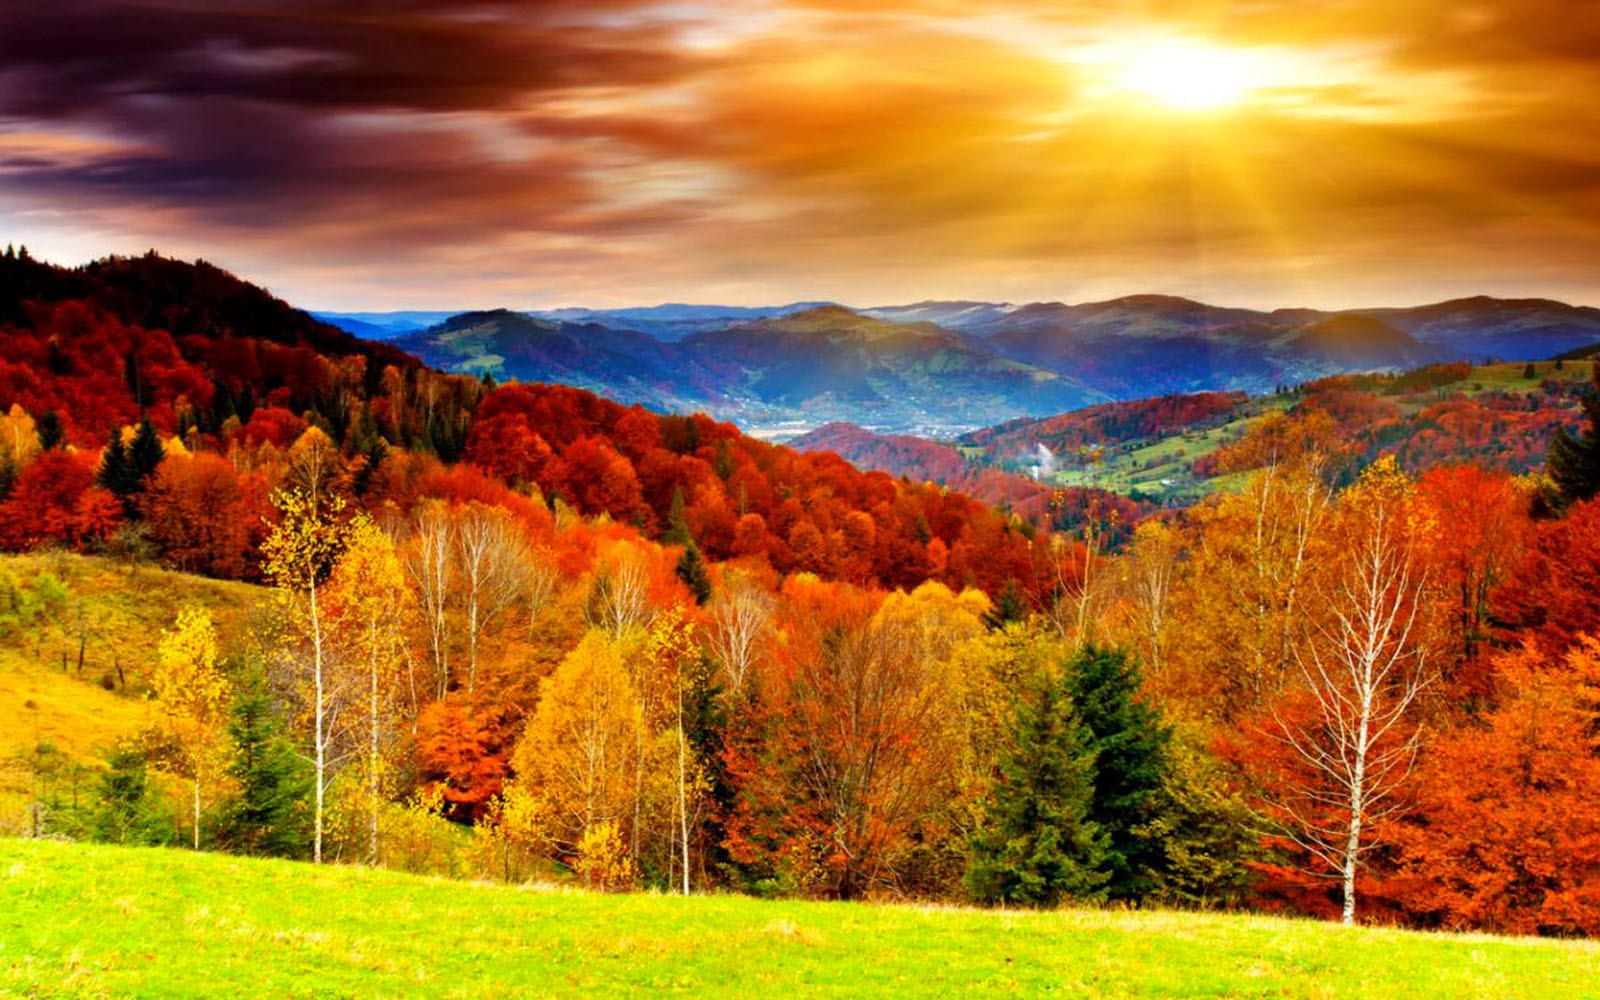 Tag Autumn Scenery Wallpapers BackgroundsPhotos Images and 1600x1000